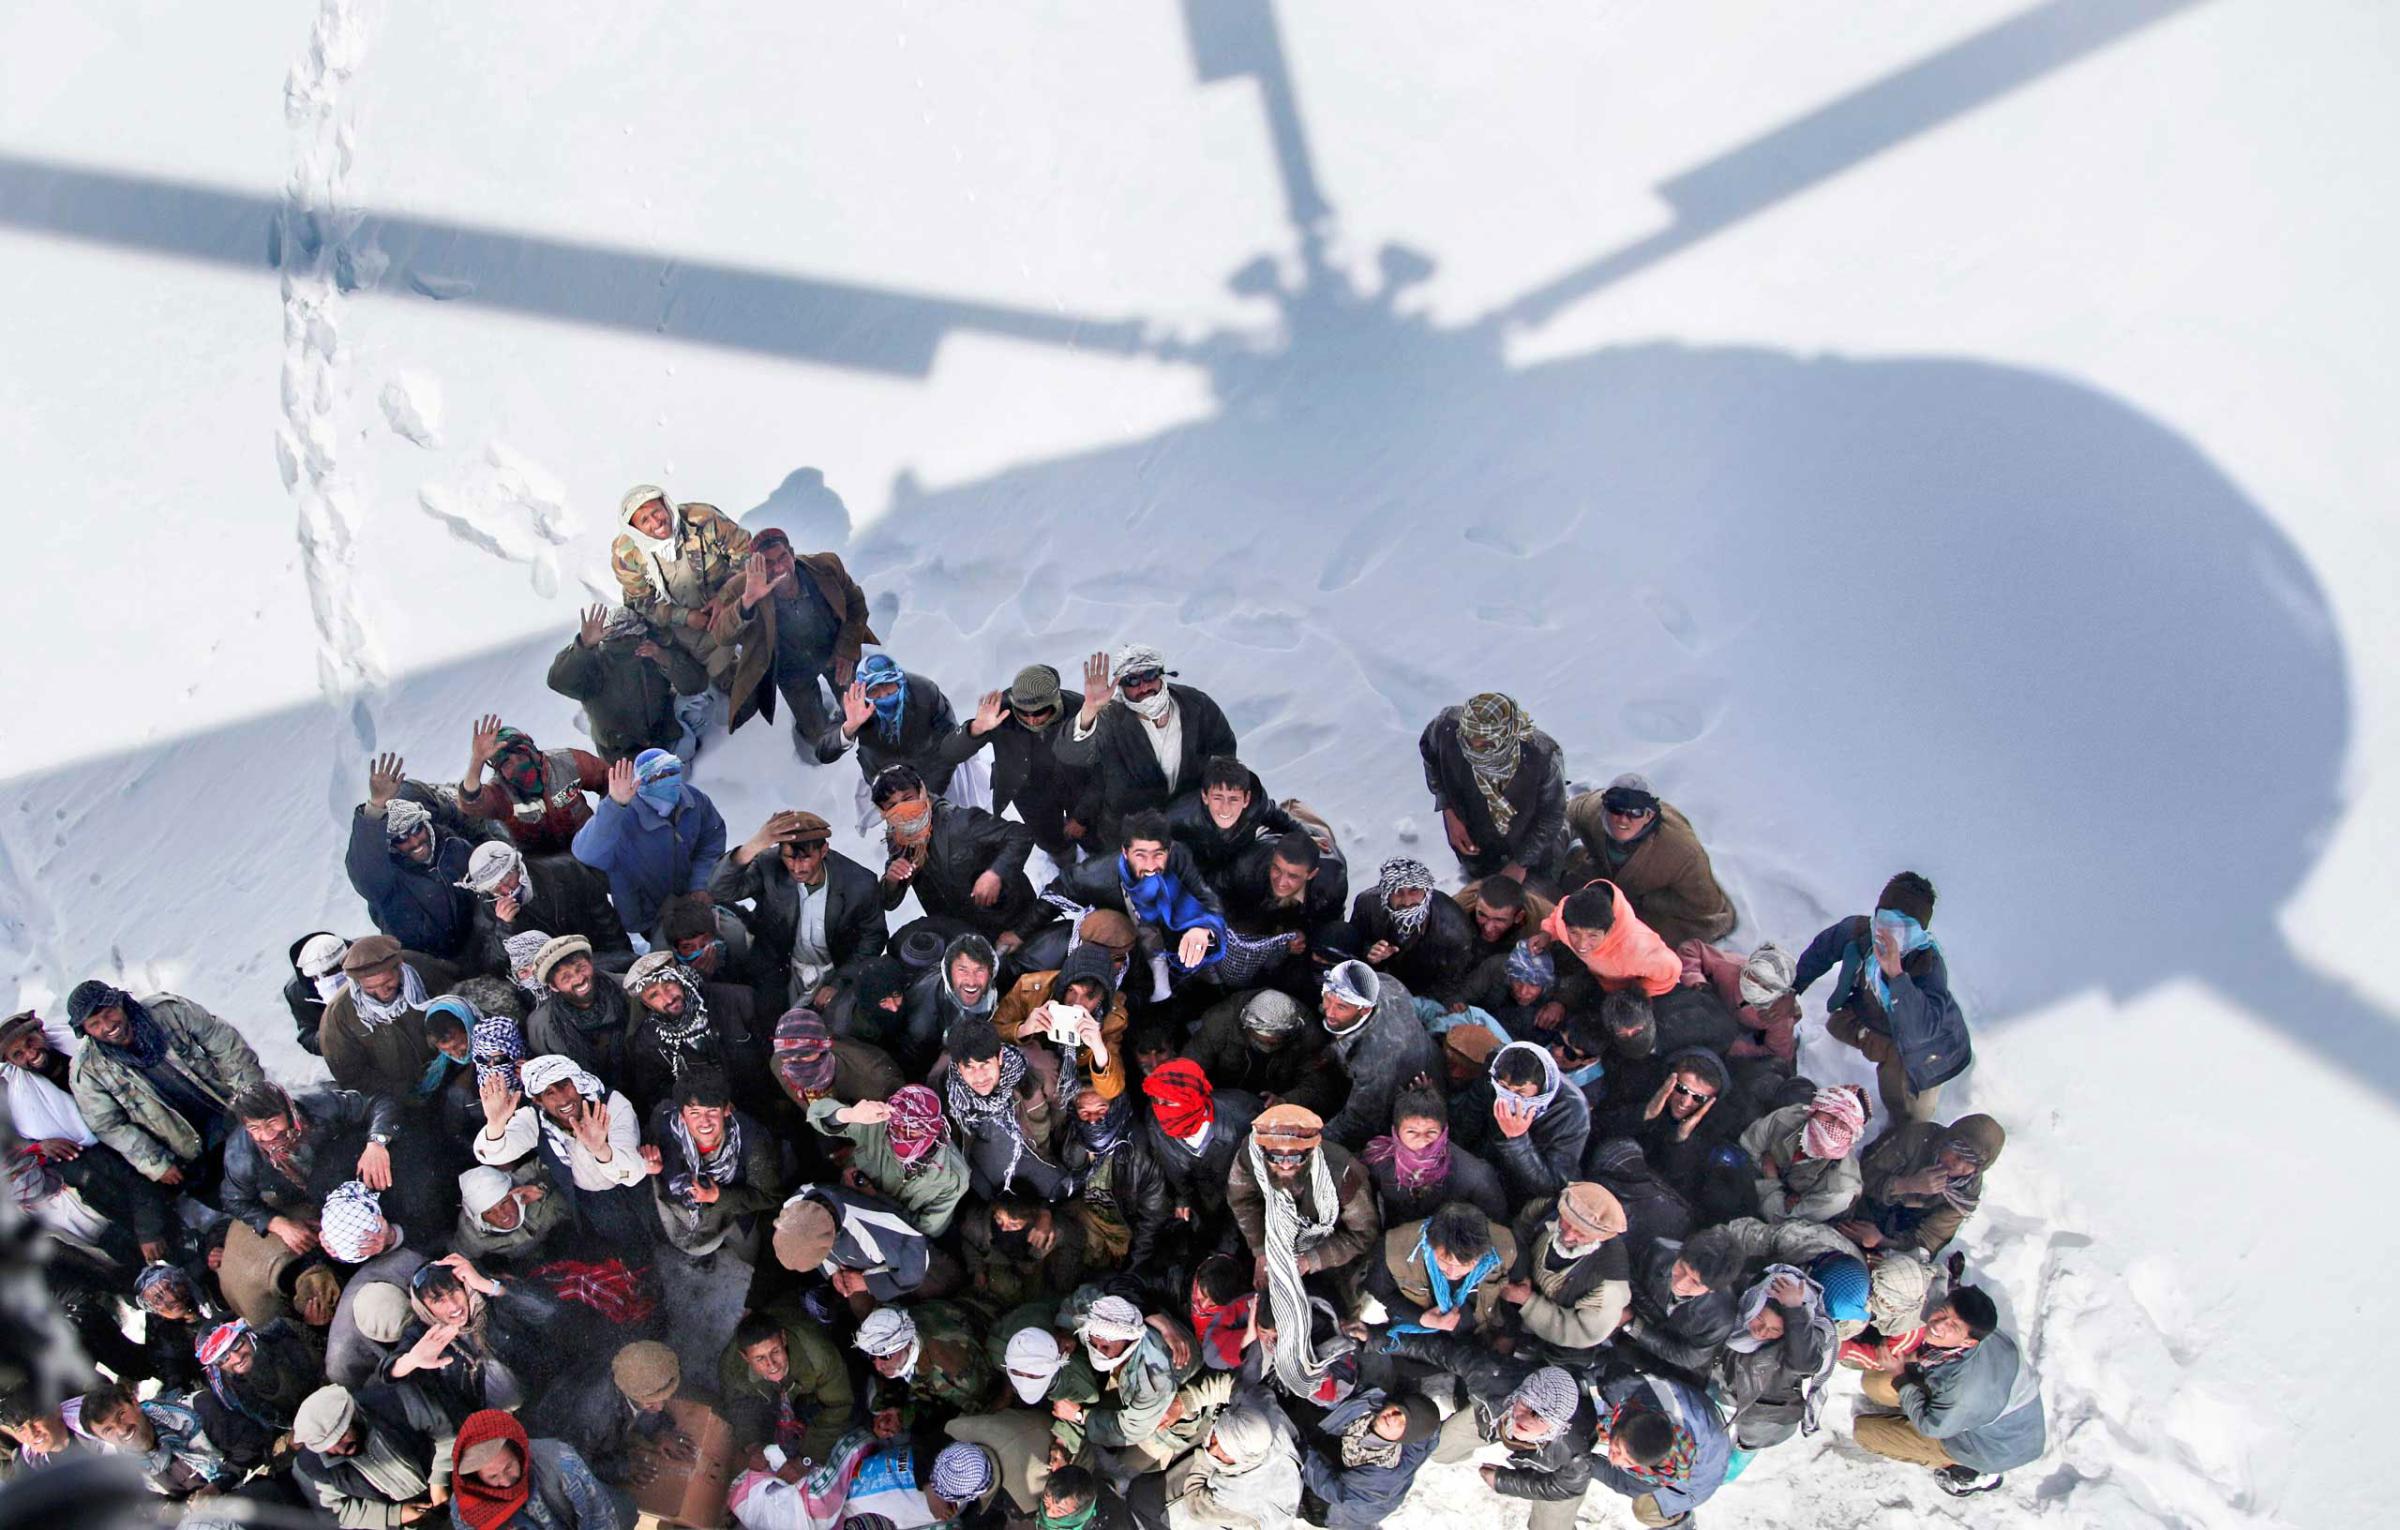 Survivors of an avalanche wait to receive relief goods distributed by an Army helicopter in the Paryan district of Panjshir province, Afghanistan. Feb. 28, 2015.